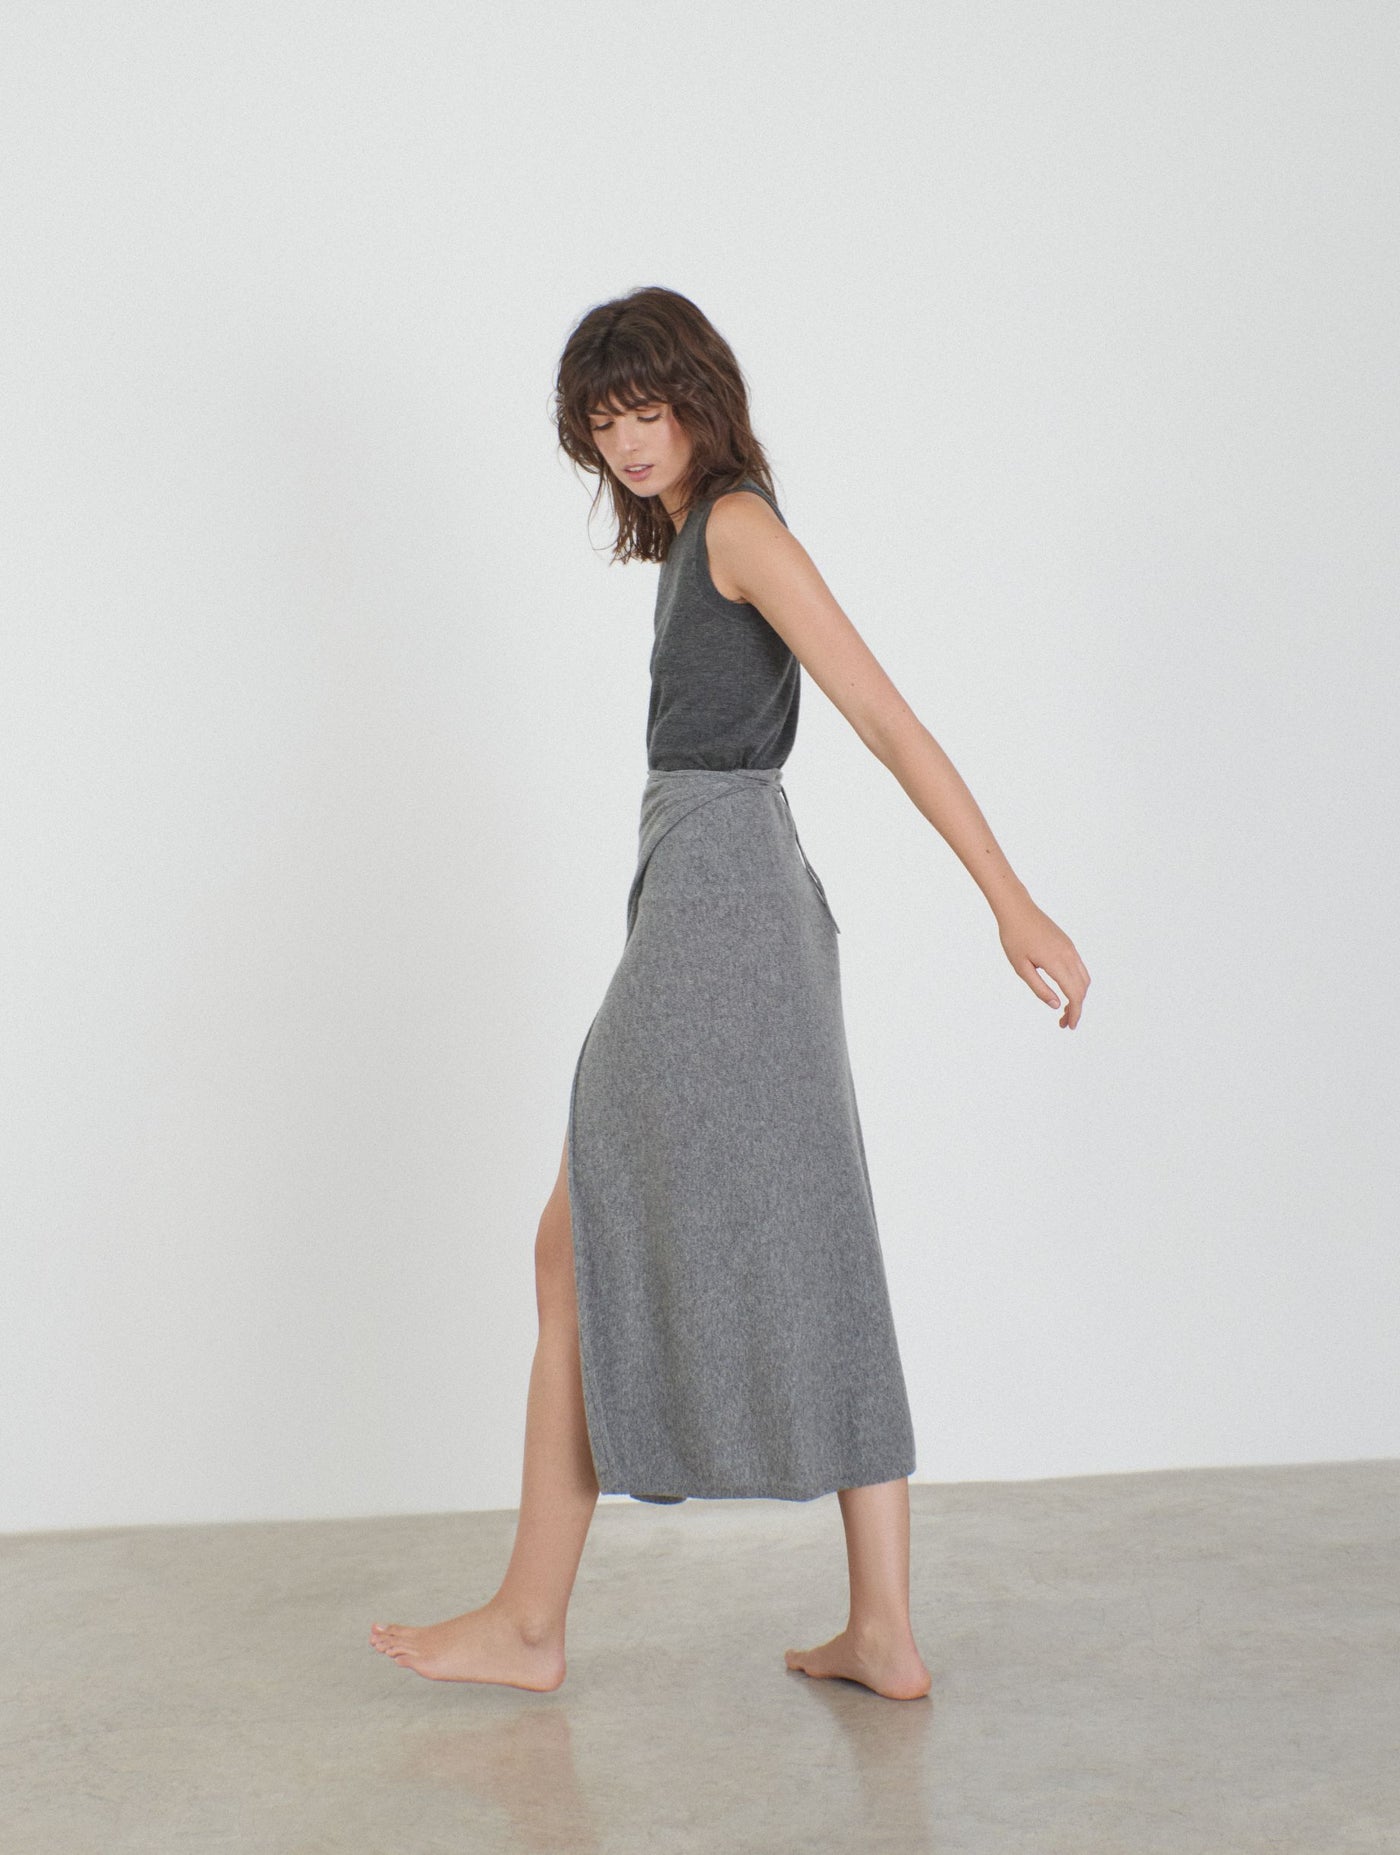 Cashmere knitted sleeveless top Grey